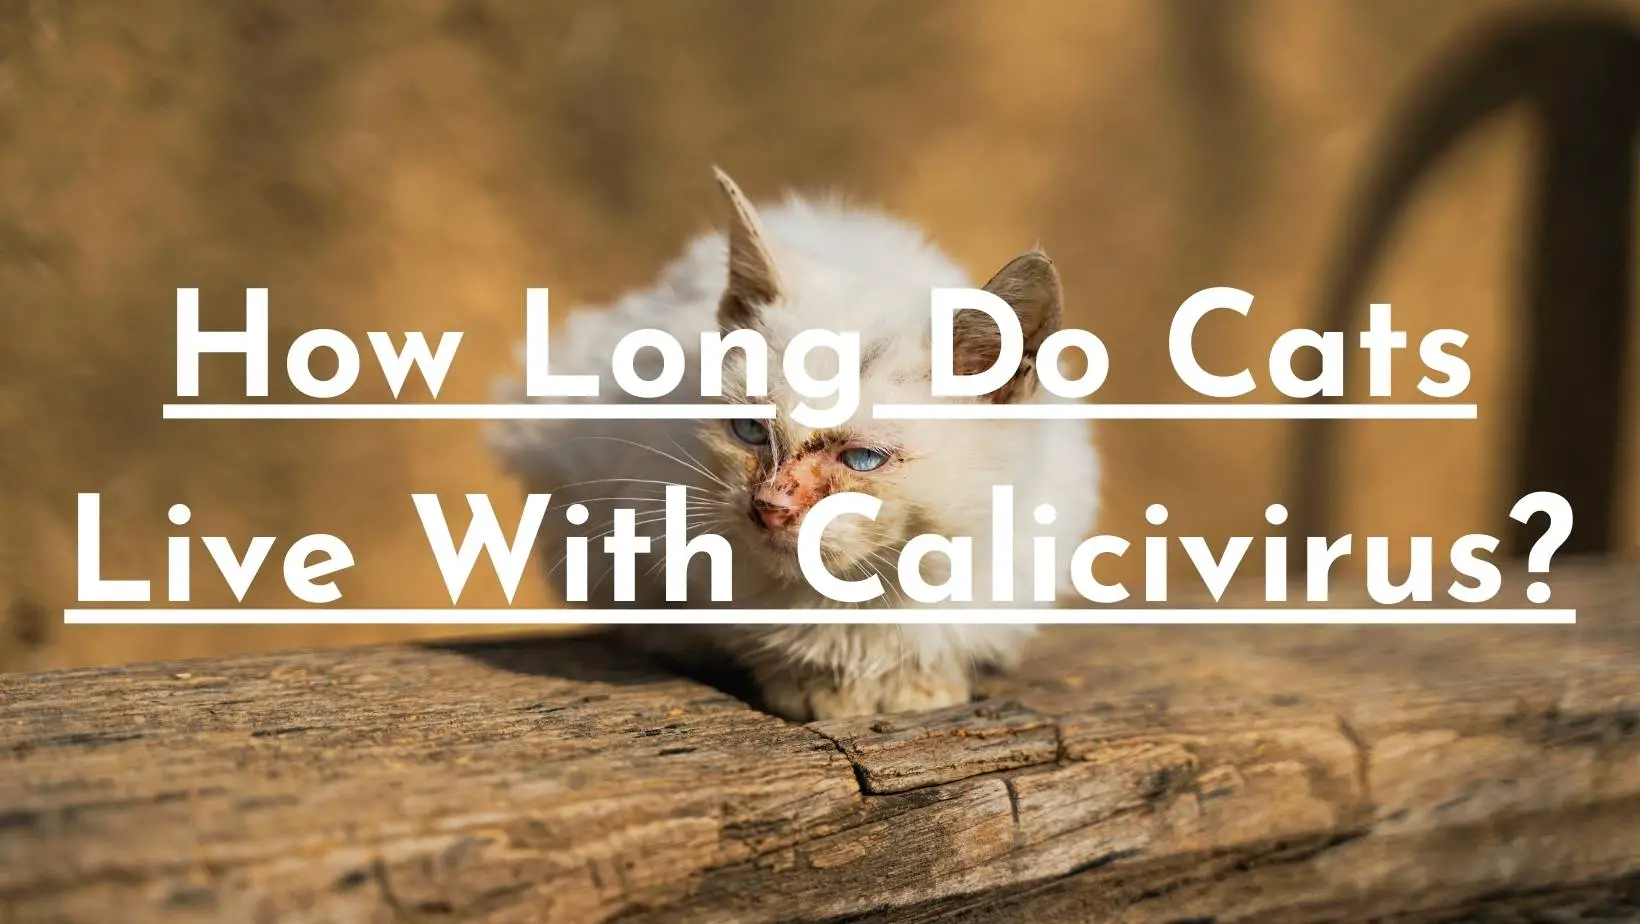 How Long Do Cats Live With Calicivirus?